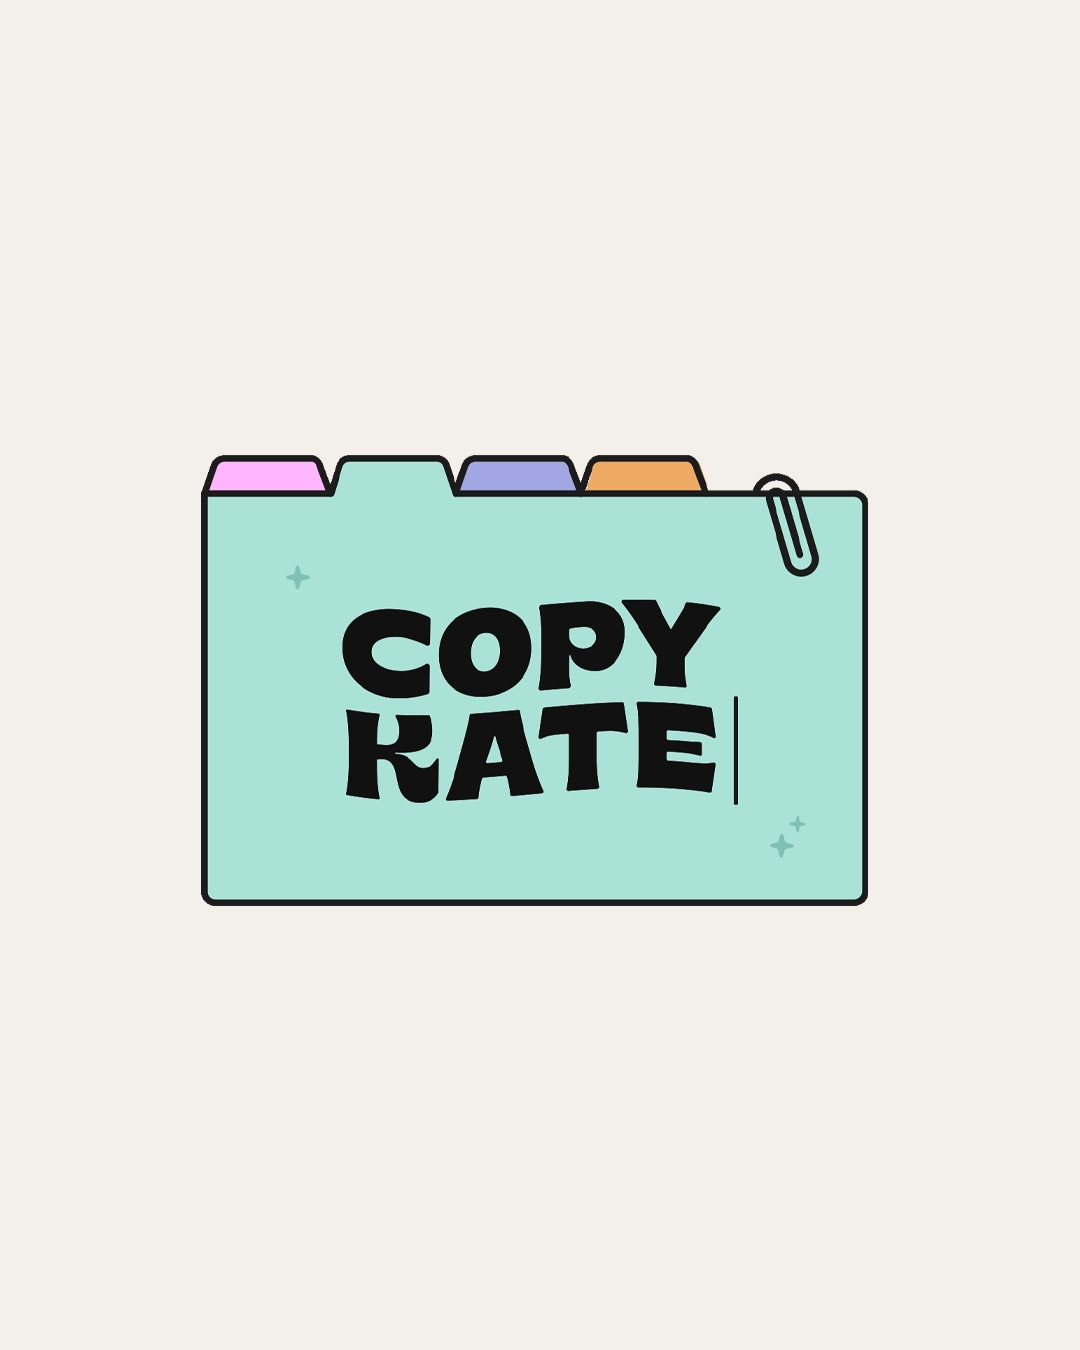 Logo design for CopyKate, a freelance copywriting business based in Ireland - designed by Wiltshire-based graphic designer, Kaye Huett - designed by Wiltshire-based graphic designer, Kaye Huett